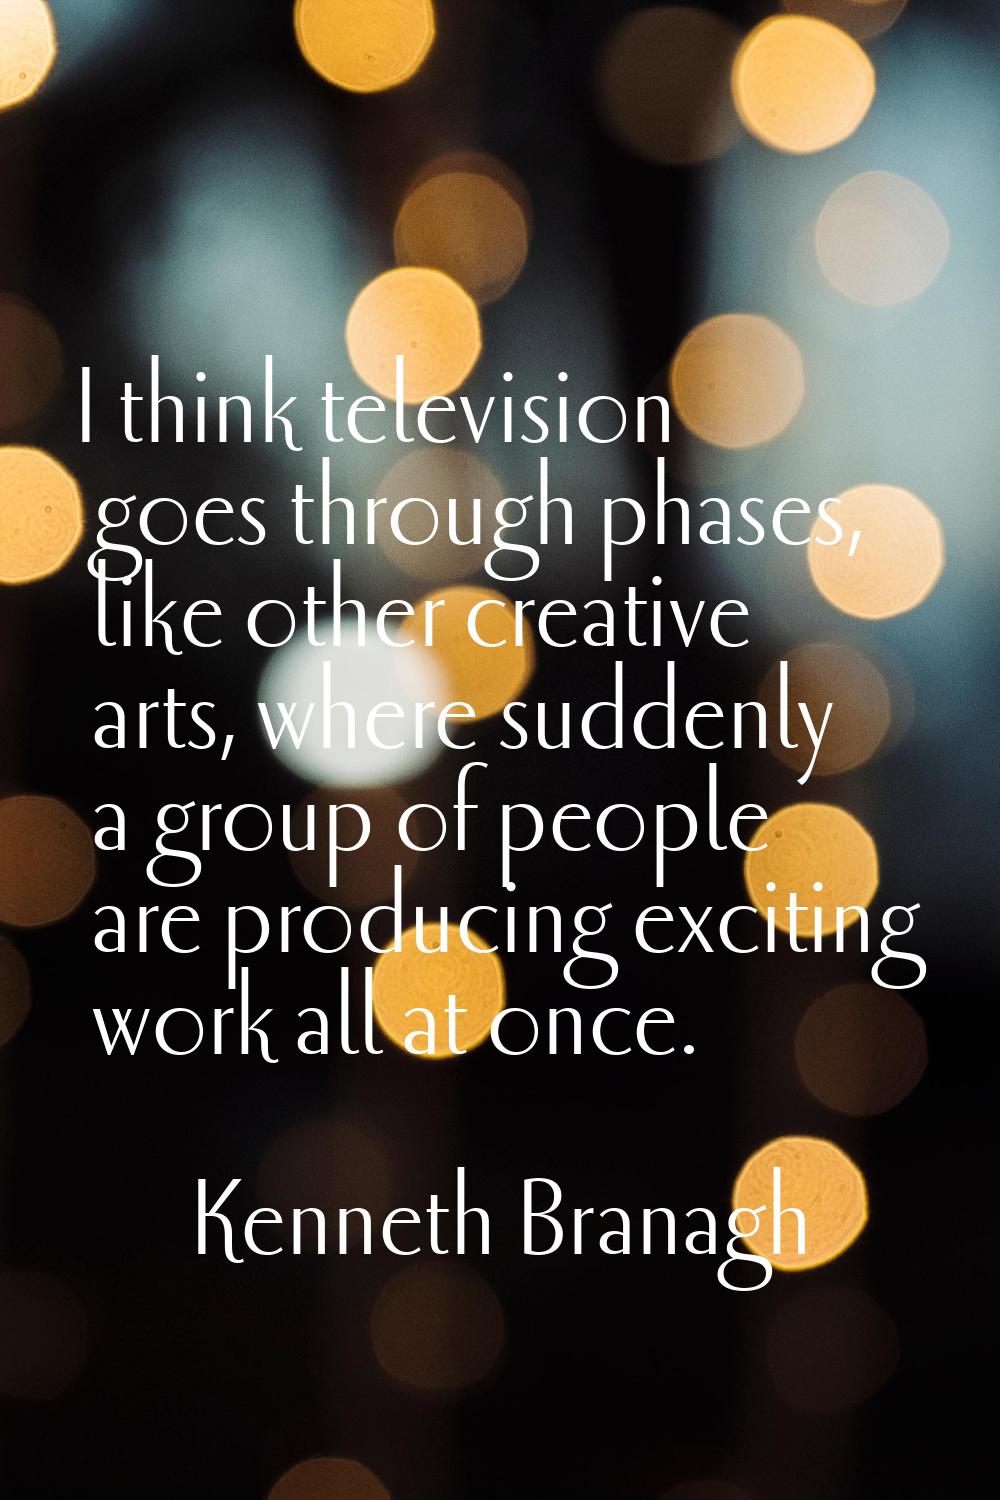 I think television goes through phases, like other creative arts, where suddenly a group of people 